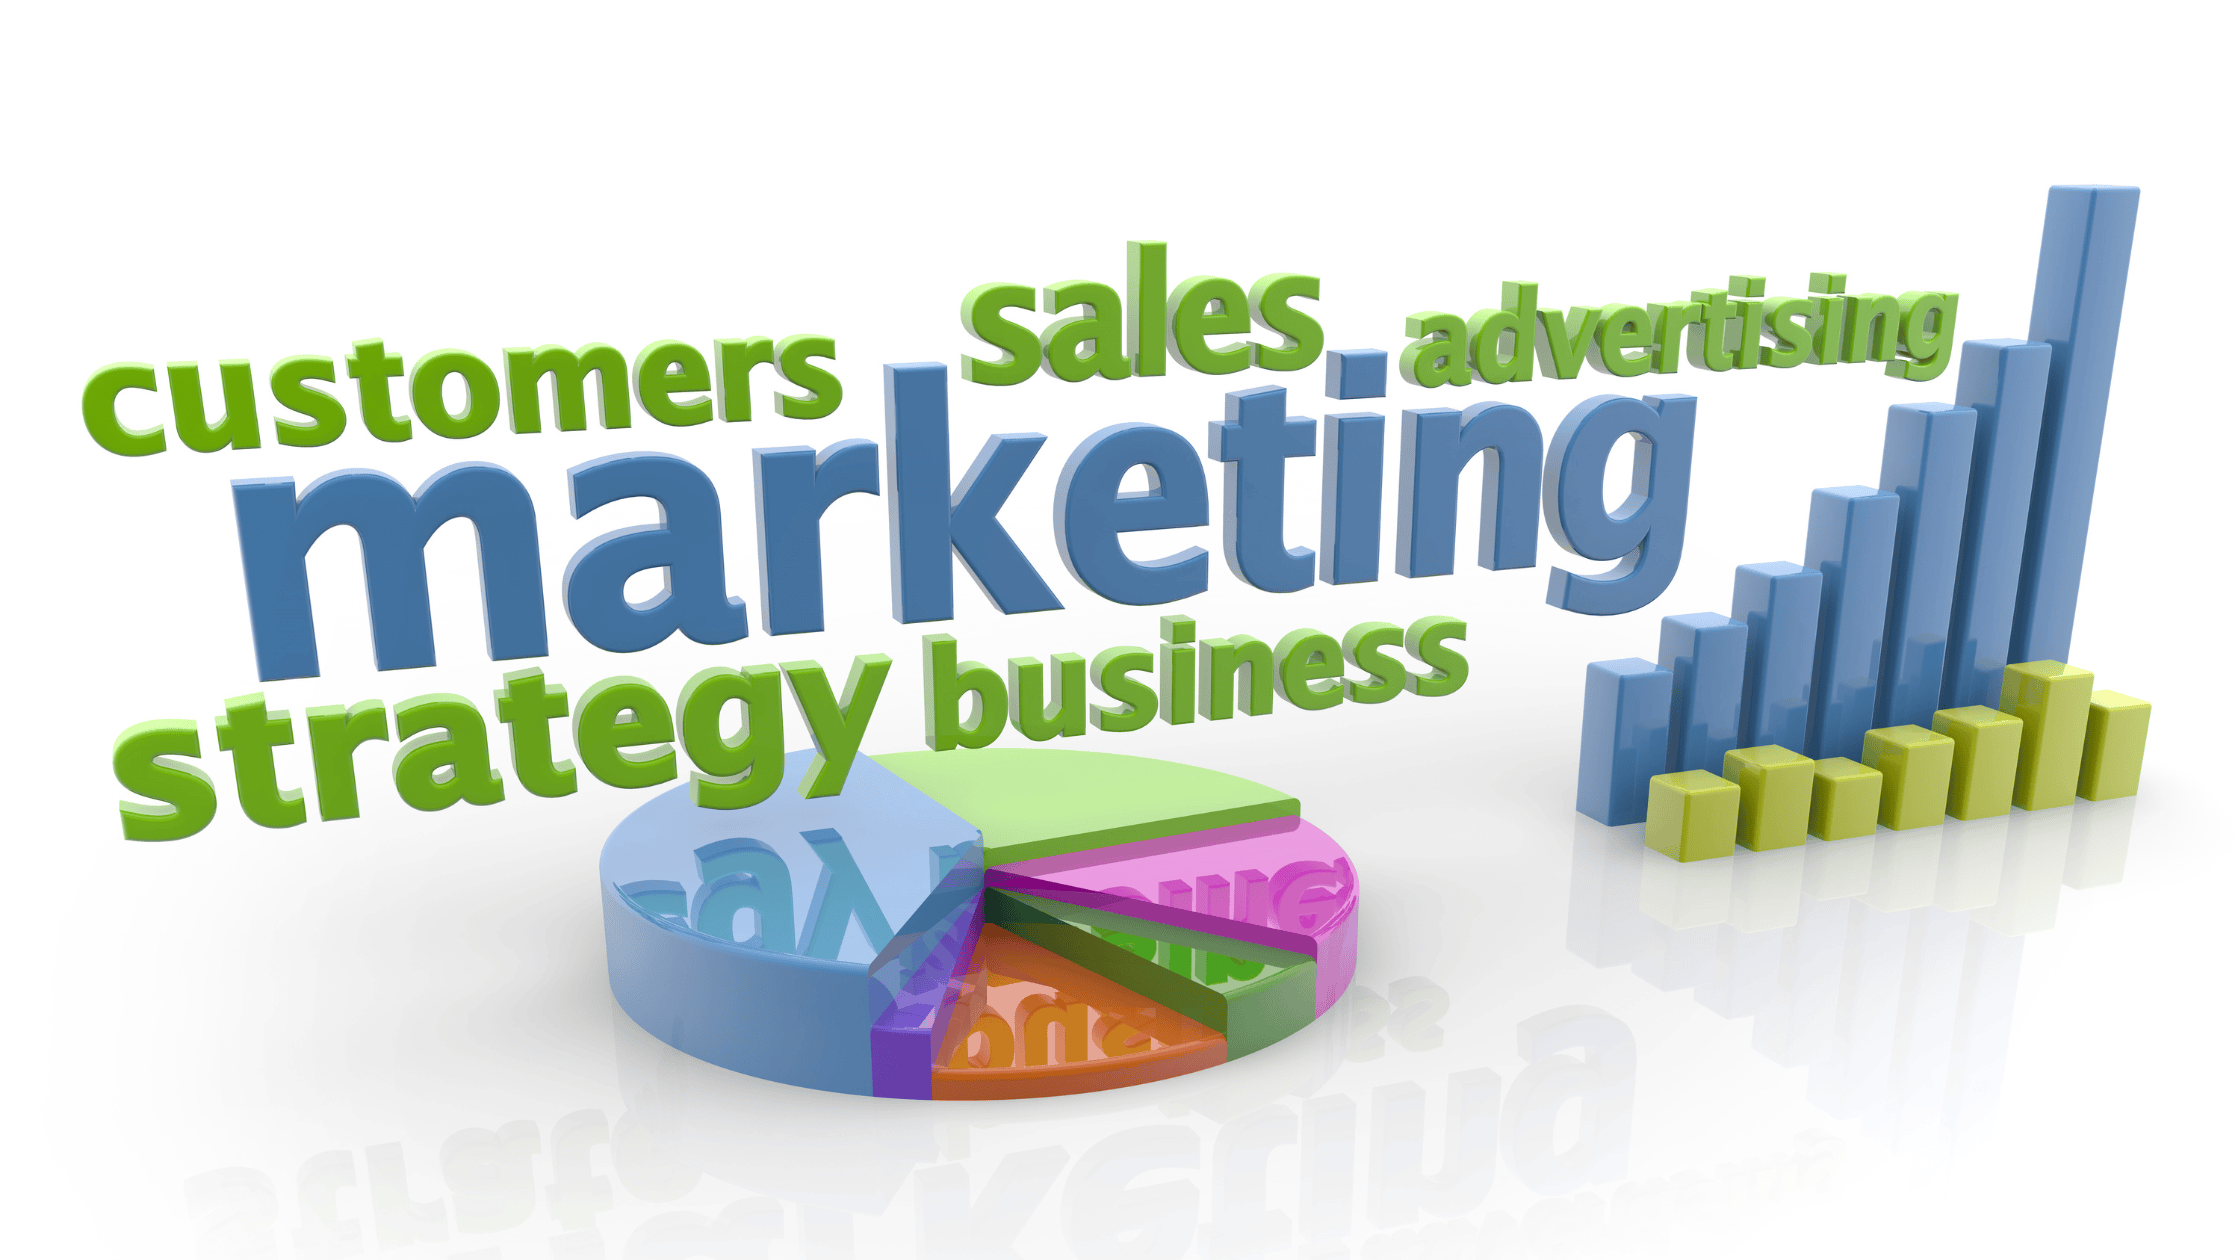 Marketing words - customers, sales, advertising, marketing, strategy, business writen with a small bar to indicate success